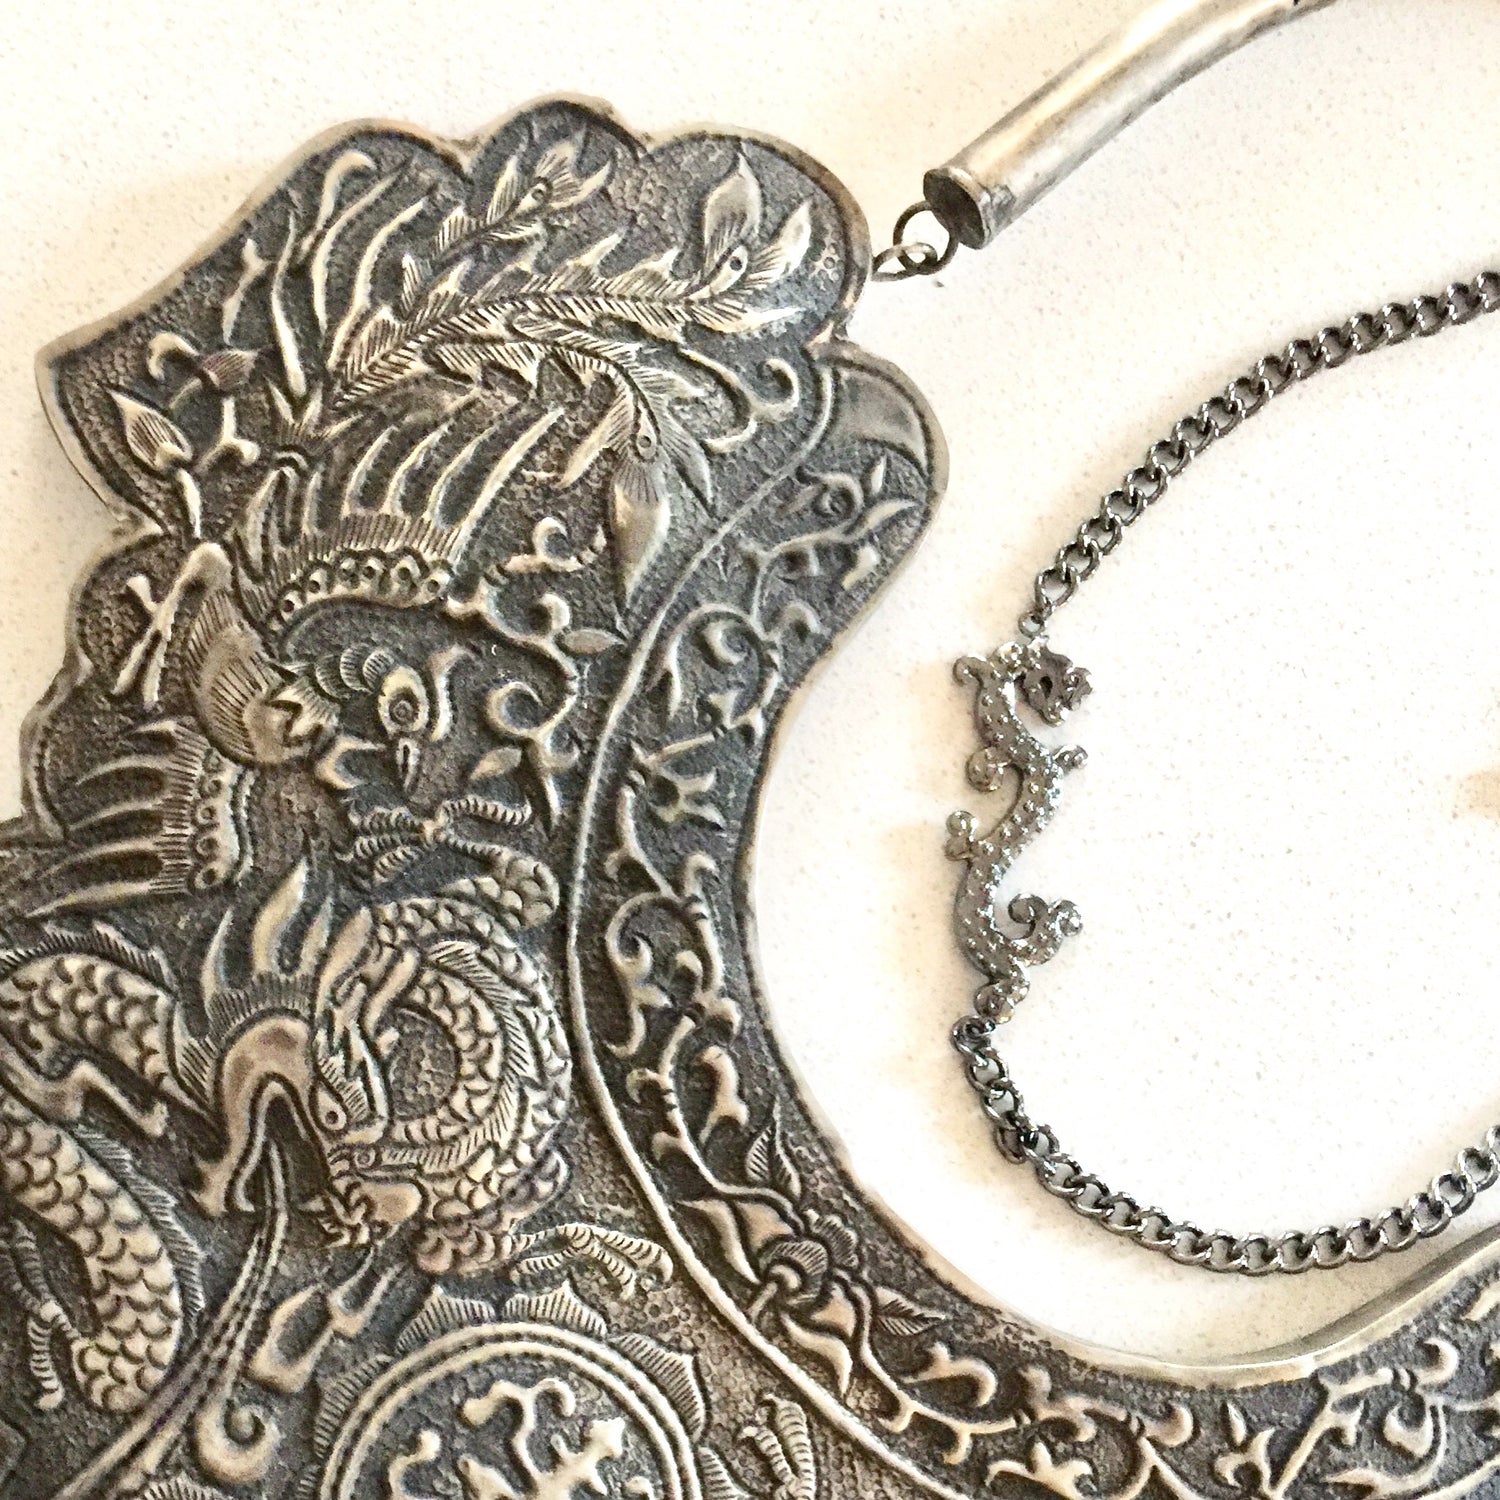 Long Dragon Necklace with decorative plate